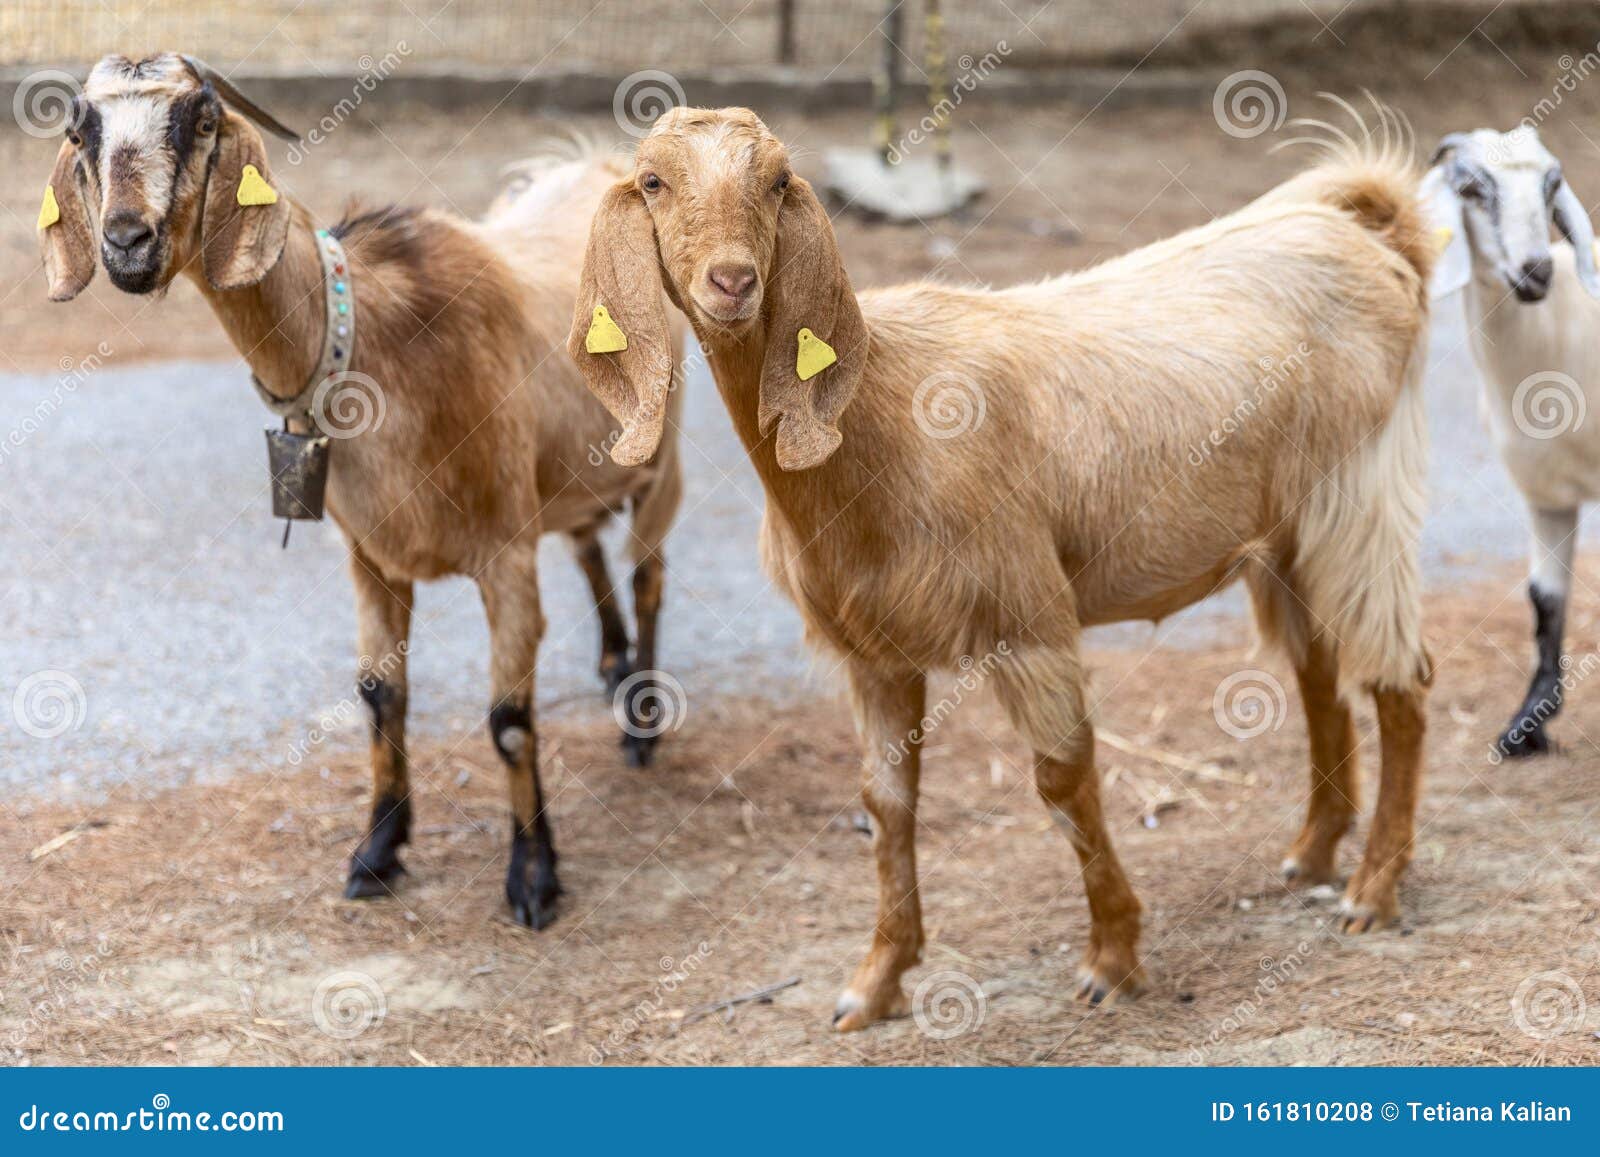 portrait of anglo-nubian goats grazing in the mountains in northern cyprus. the two cute curious animais are looking into camera